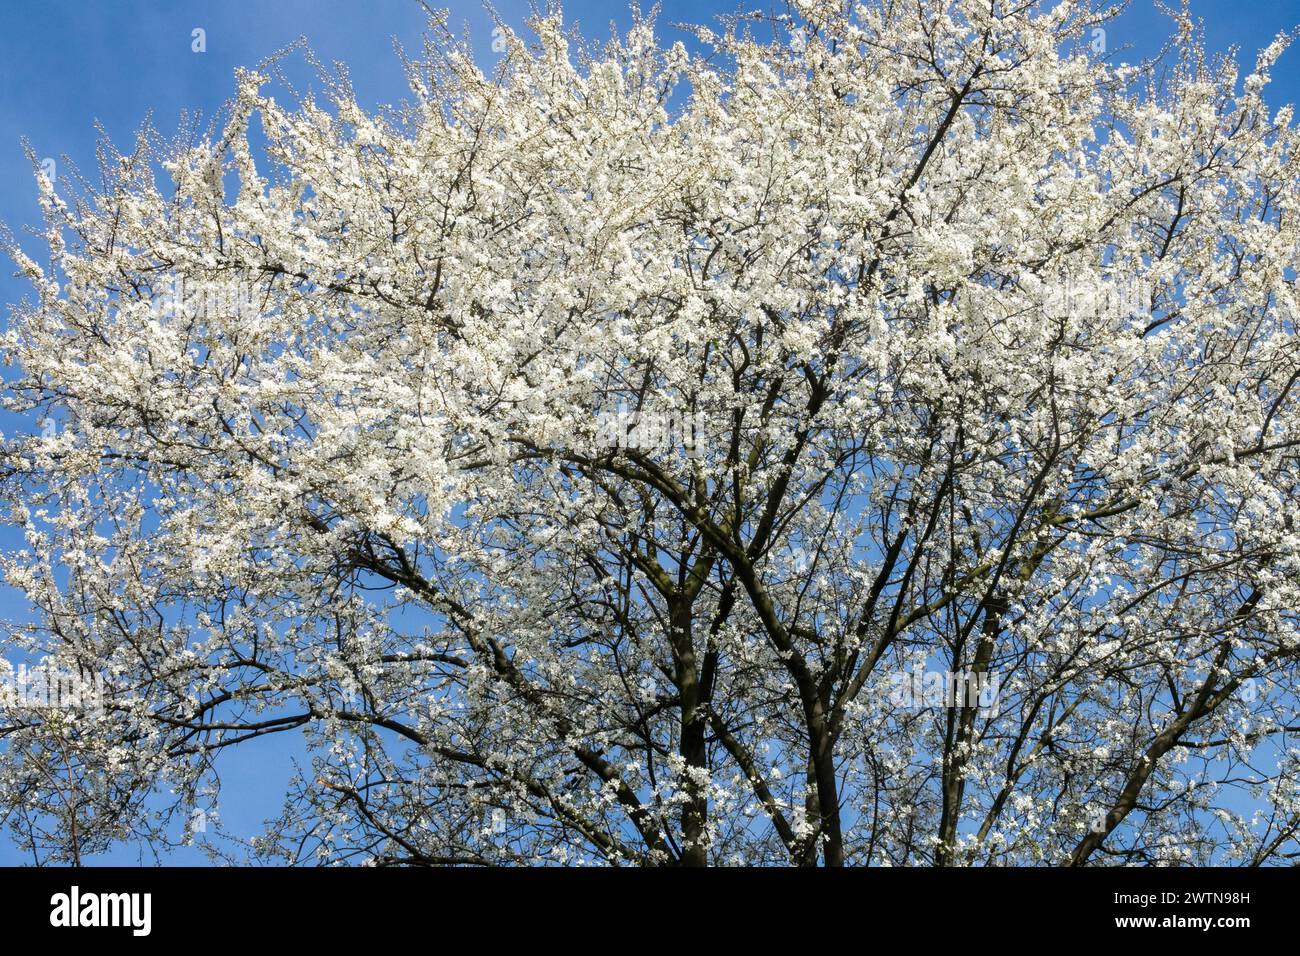 White Blossoms Branches in Early Spring Blooming Mirabelle plum Prunus domestica syriaca Flowering Shrubby Tree Twigs Blossoming March Prunus Blooms Stock Photo